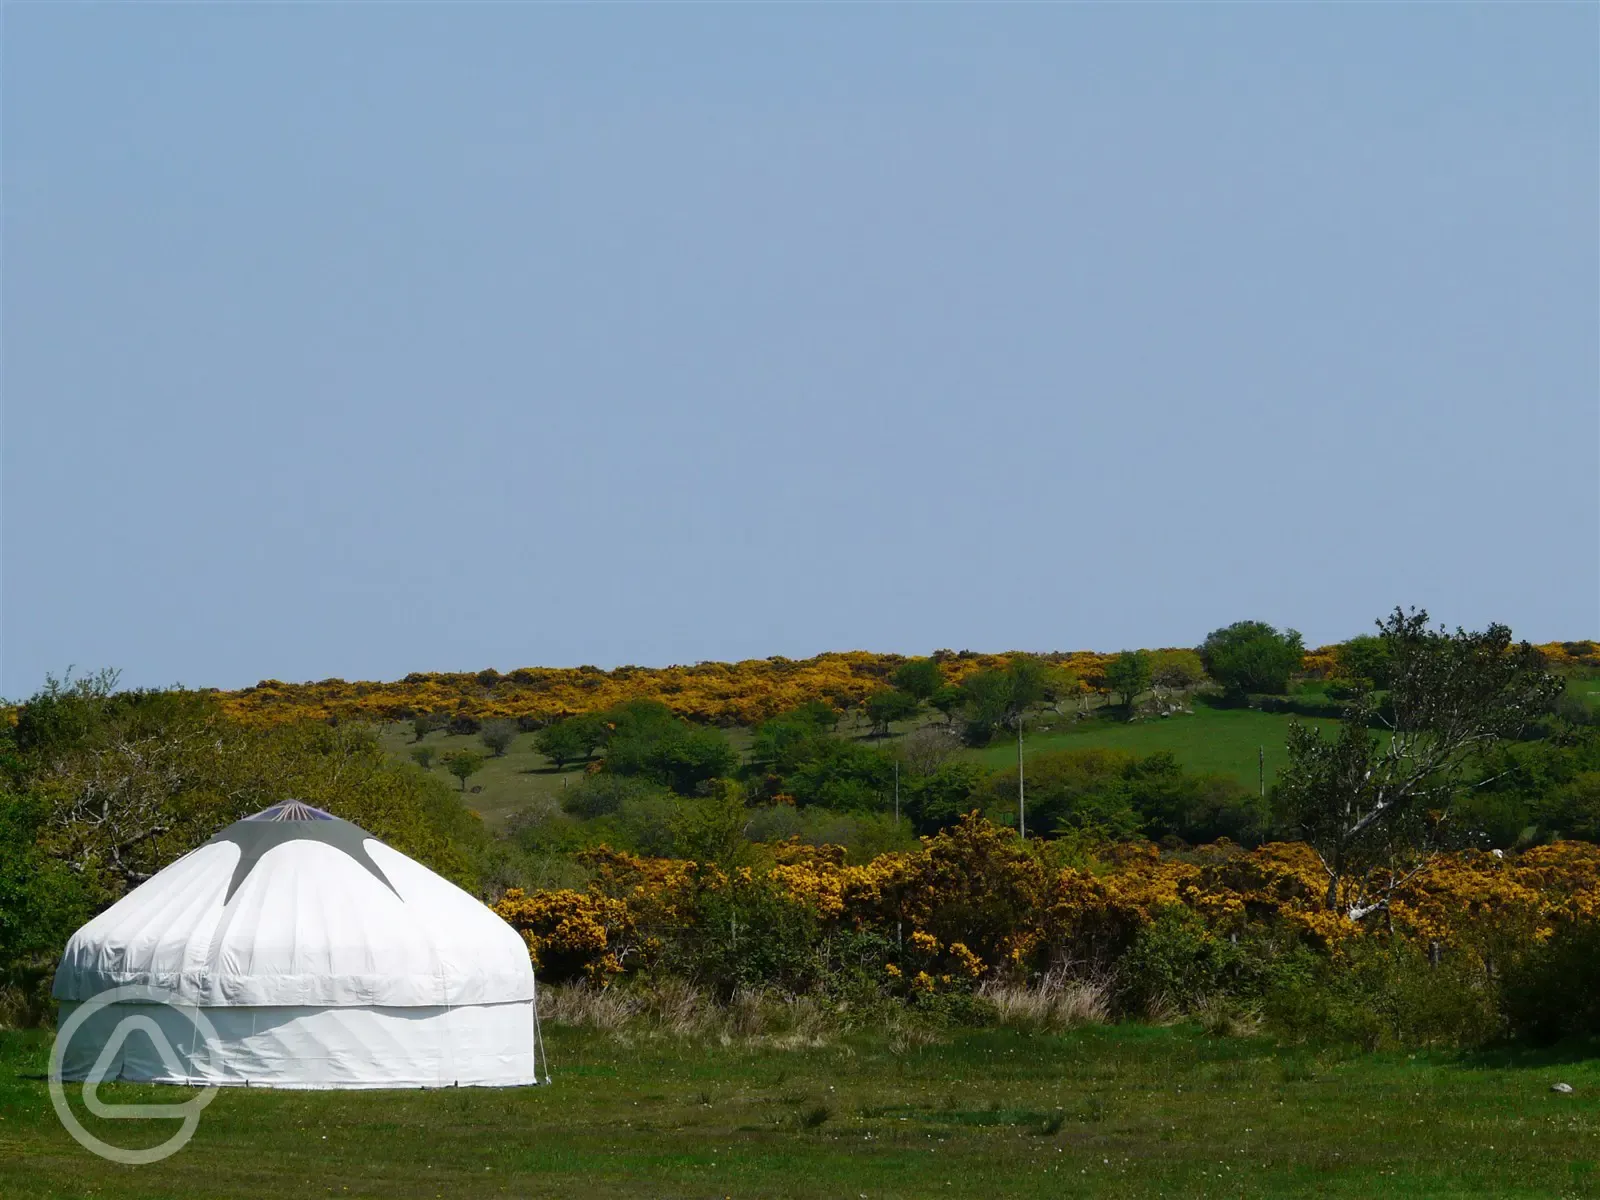 One of the yurts